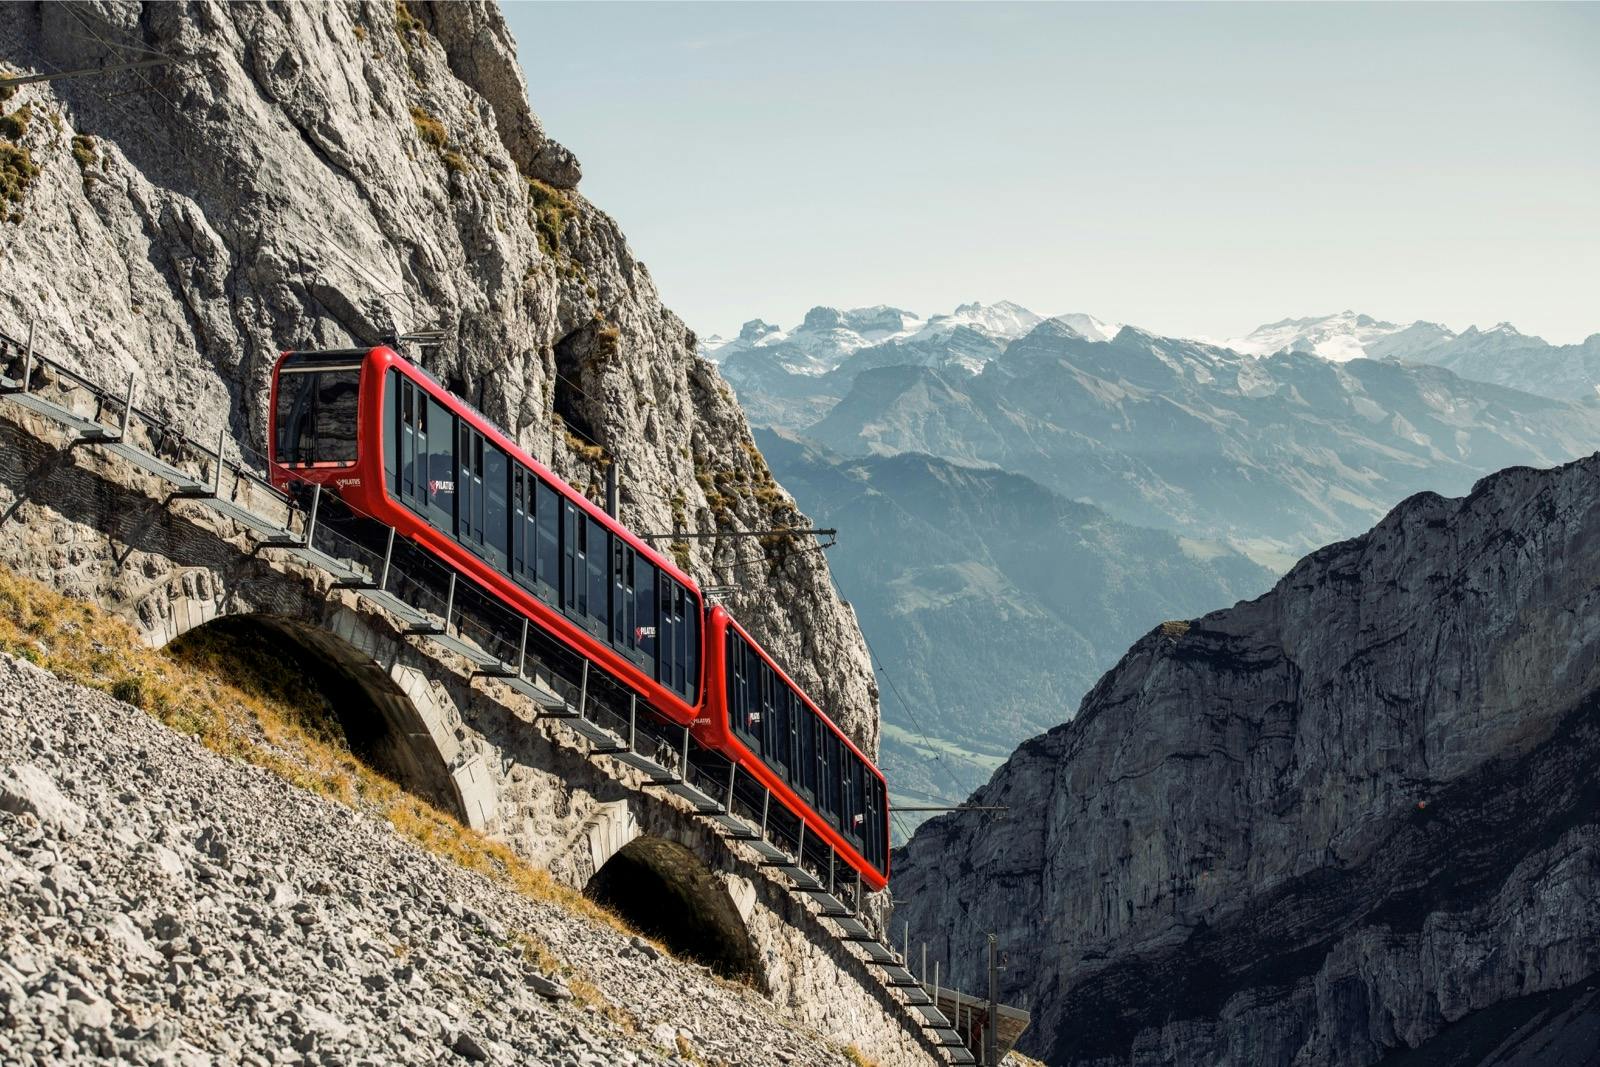 Mt. Pilatus self-guided golden roundtrip from Lucerne with boat cruise